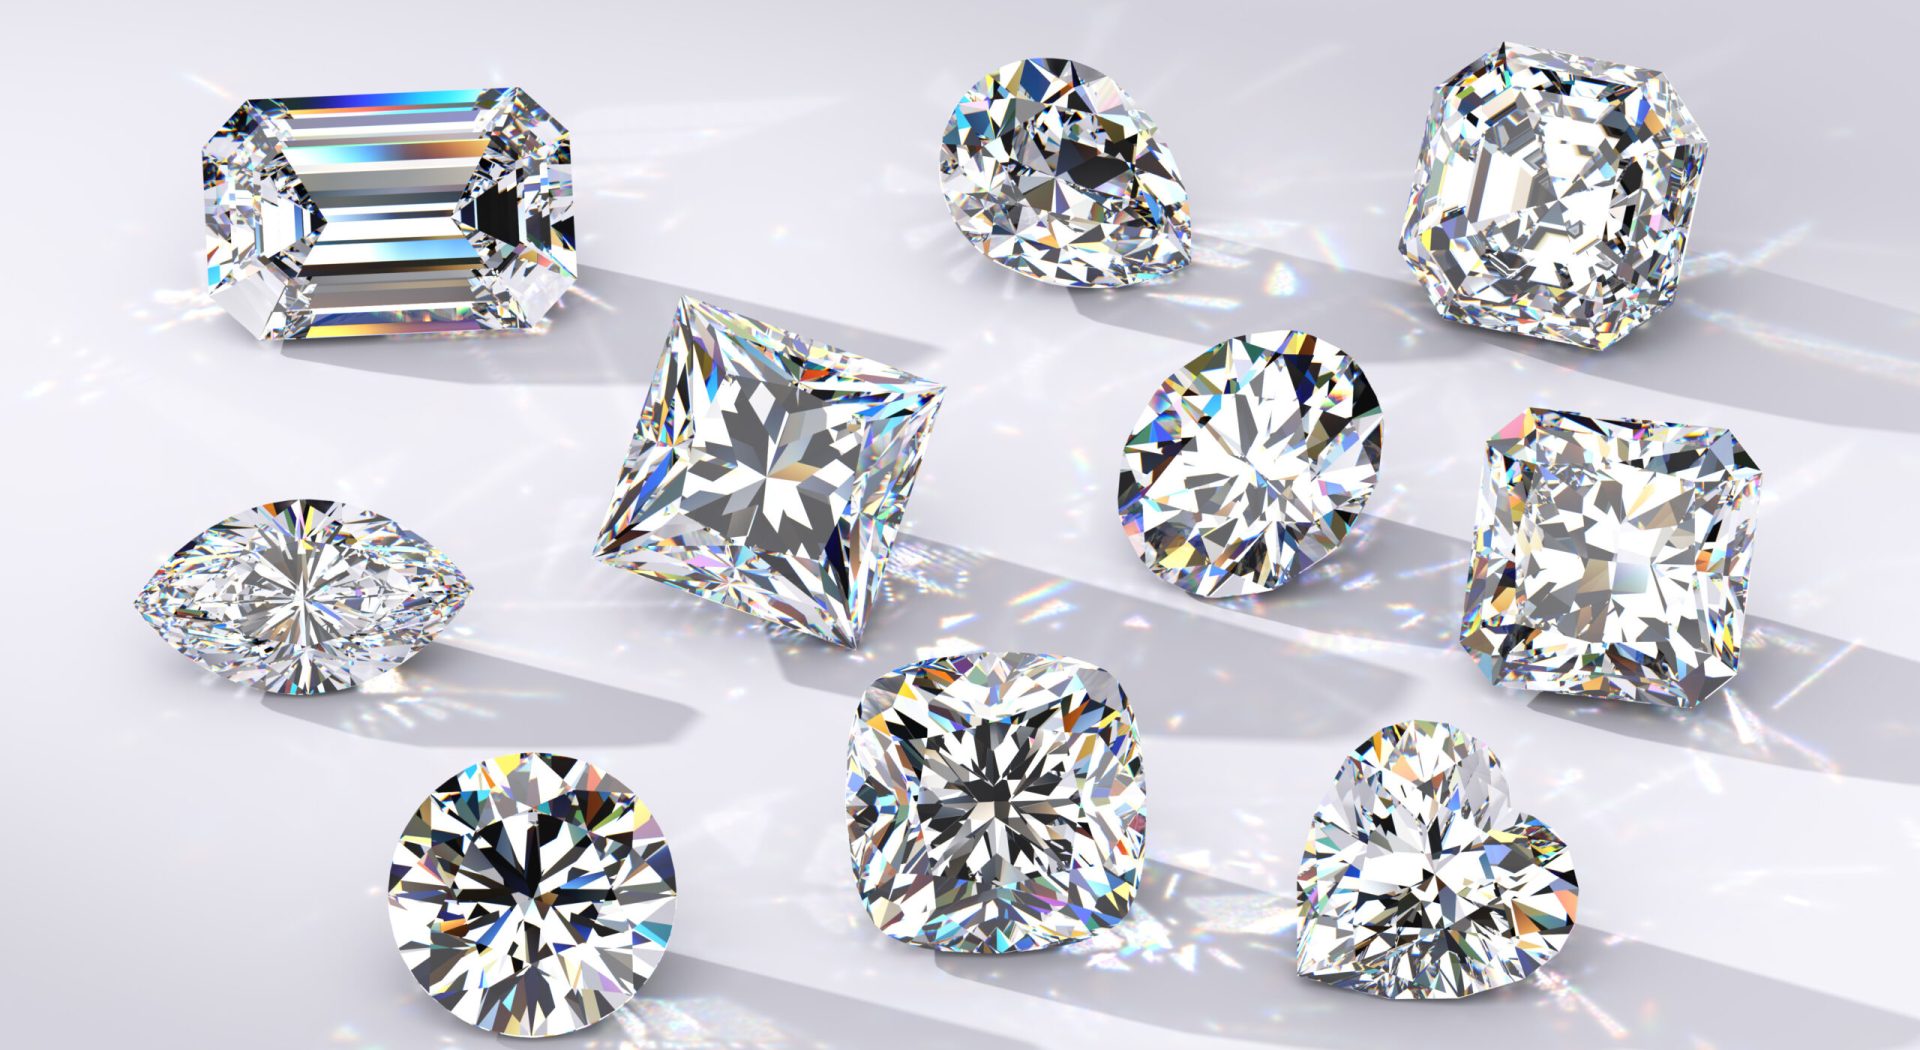 Ten diamond in various cuts including, emerald, pear, asscher, marquise, princess, oval, round, and heart.